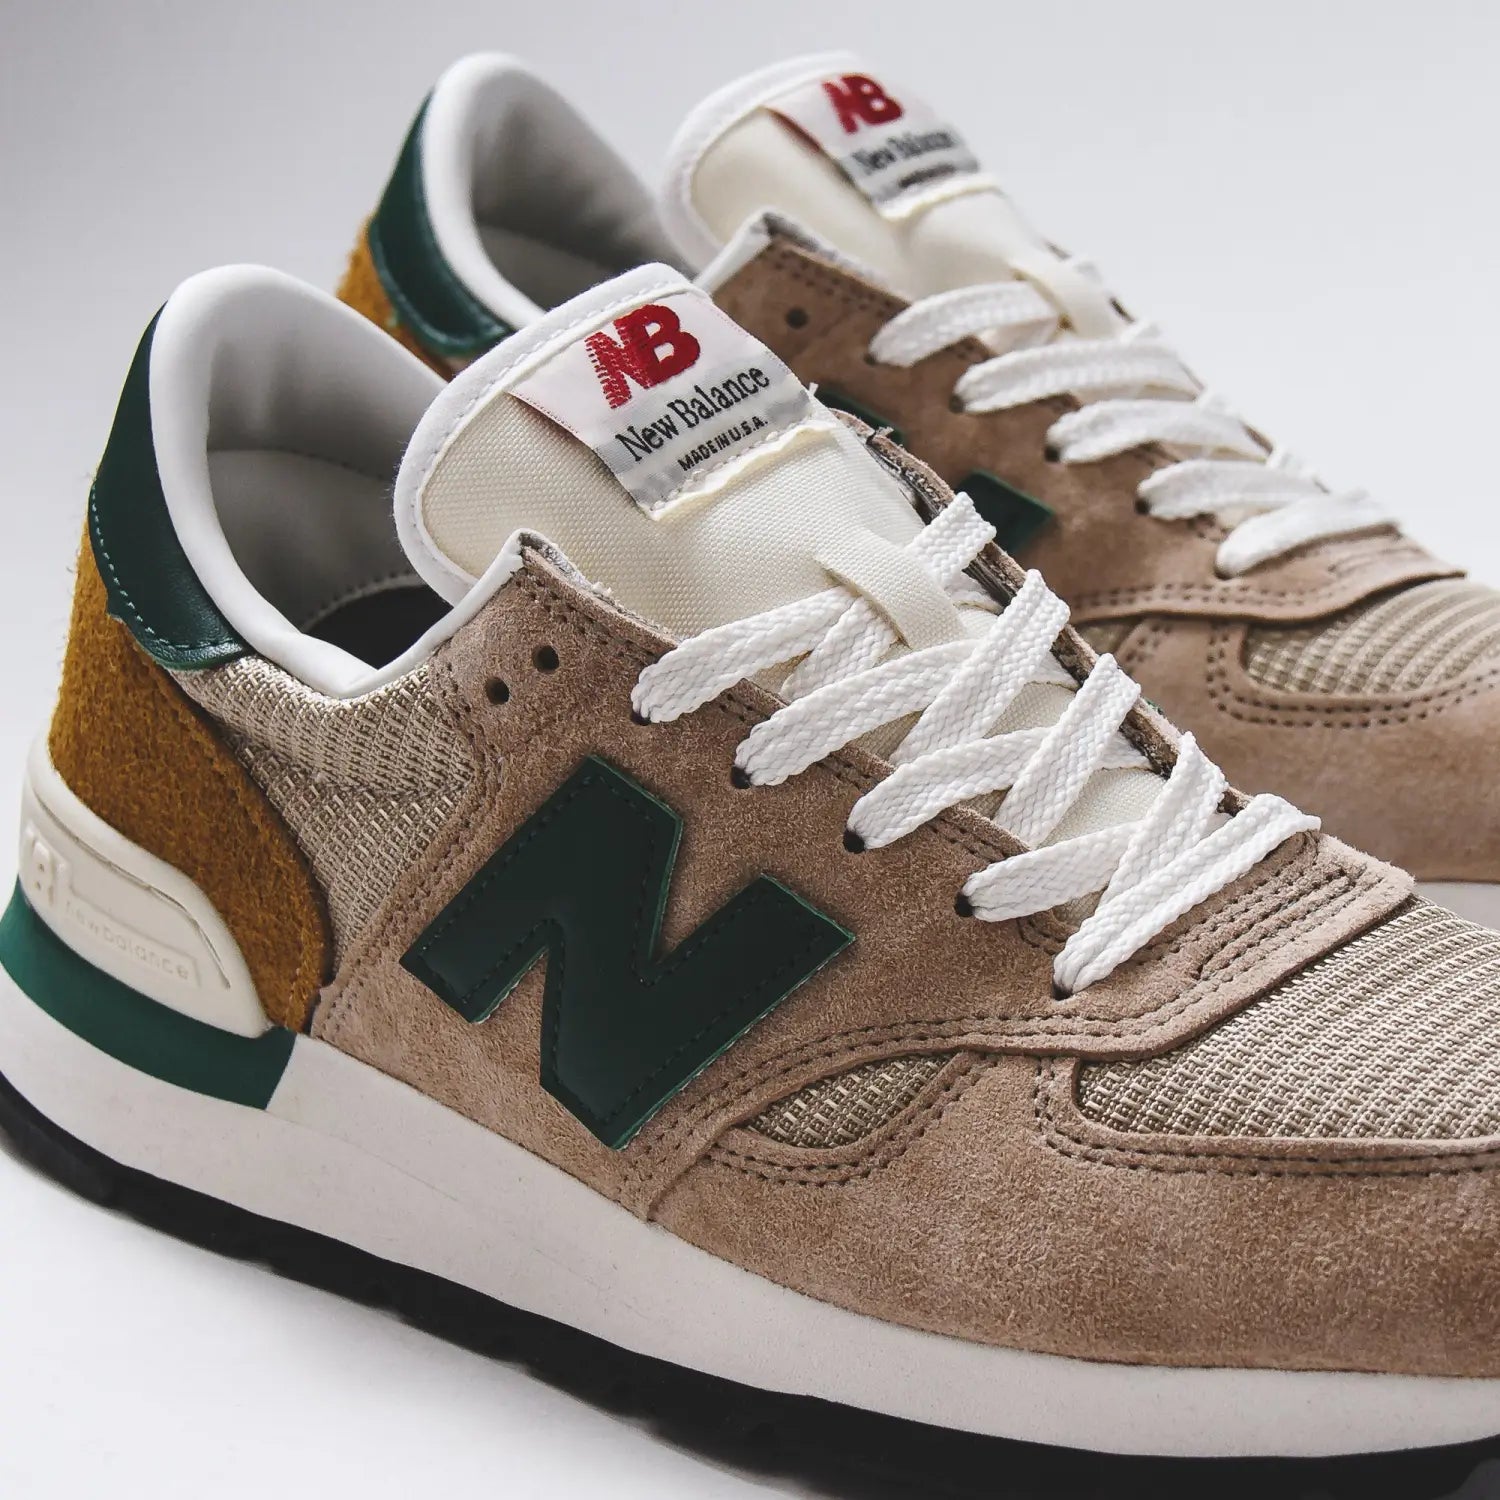 Take a Look at The New Balance 990’s MADE in USA “Tan/Green”